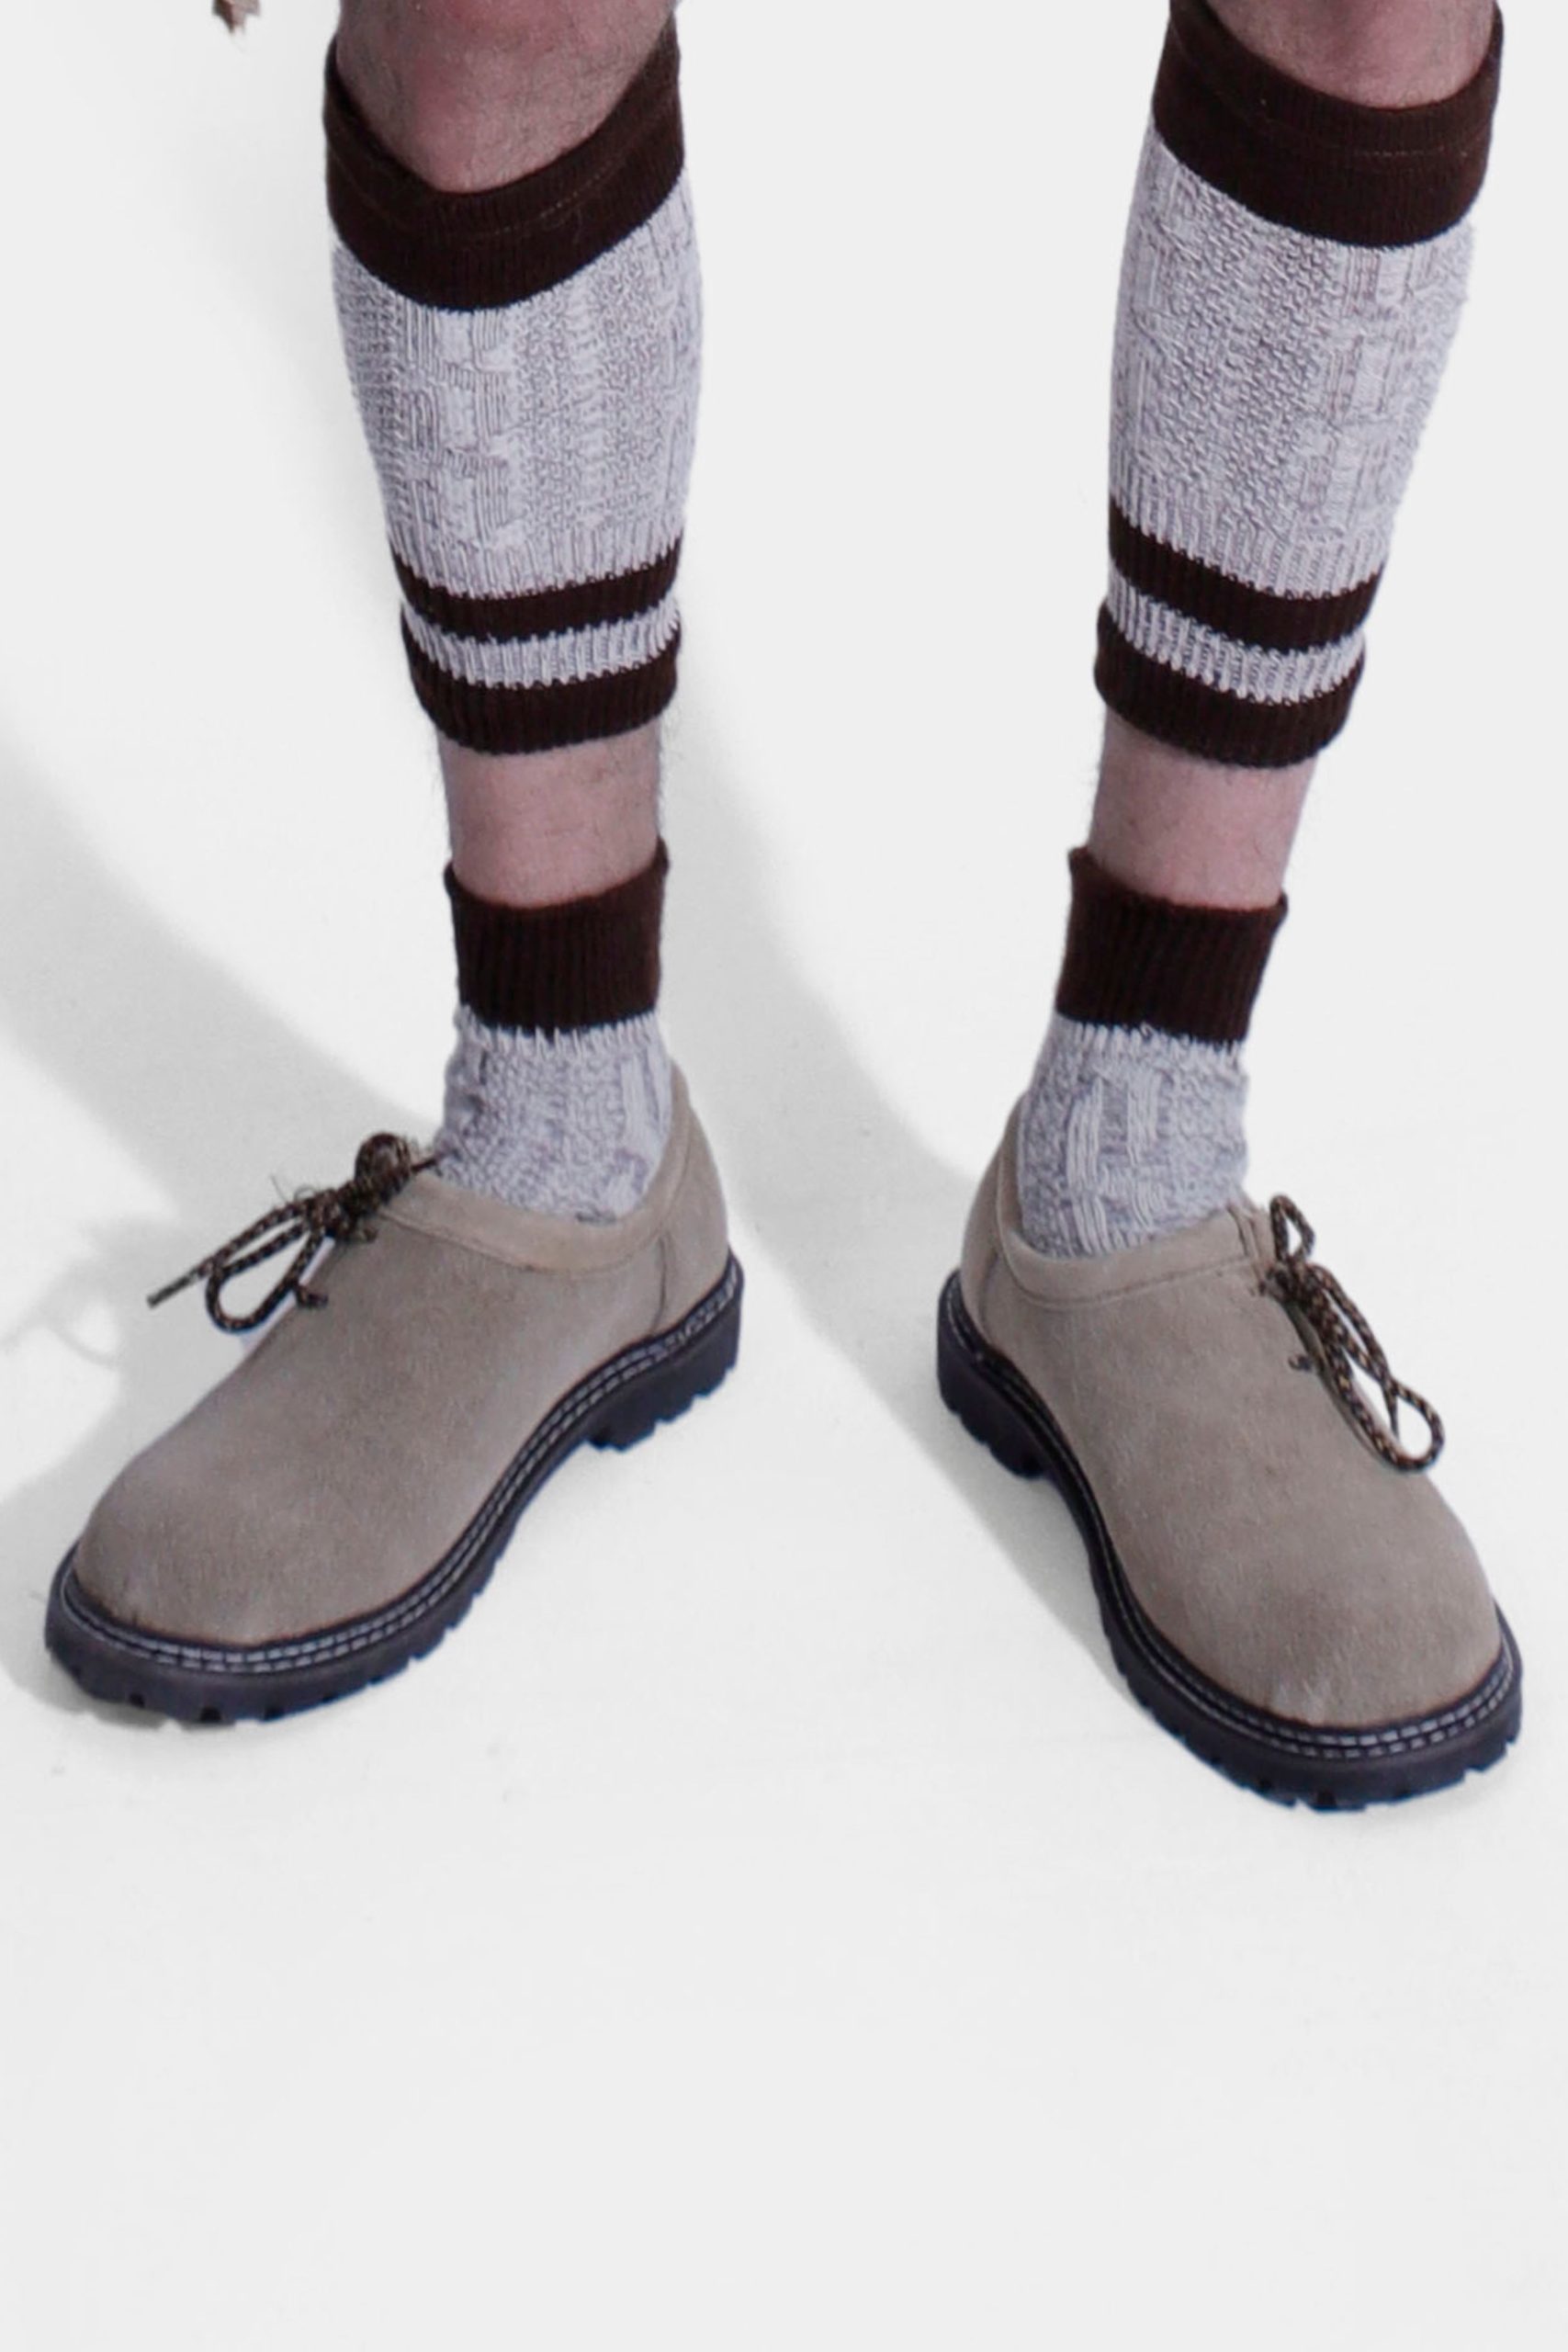 Antonio Bavarian Shoes in soft beige, shown with traditional Bavarian socks. Features a sleek, slip-resistant design with a cushioned leather insole for comfort. Perfect for pairing with Lederhosen or jeans.